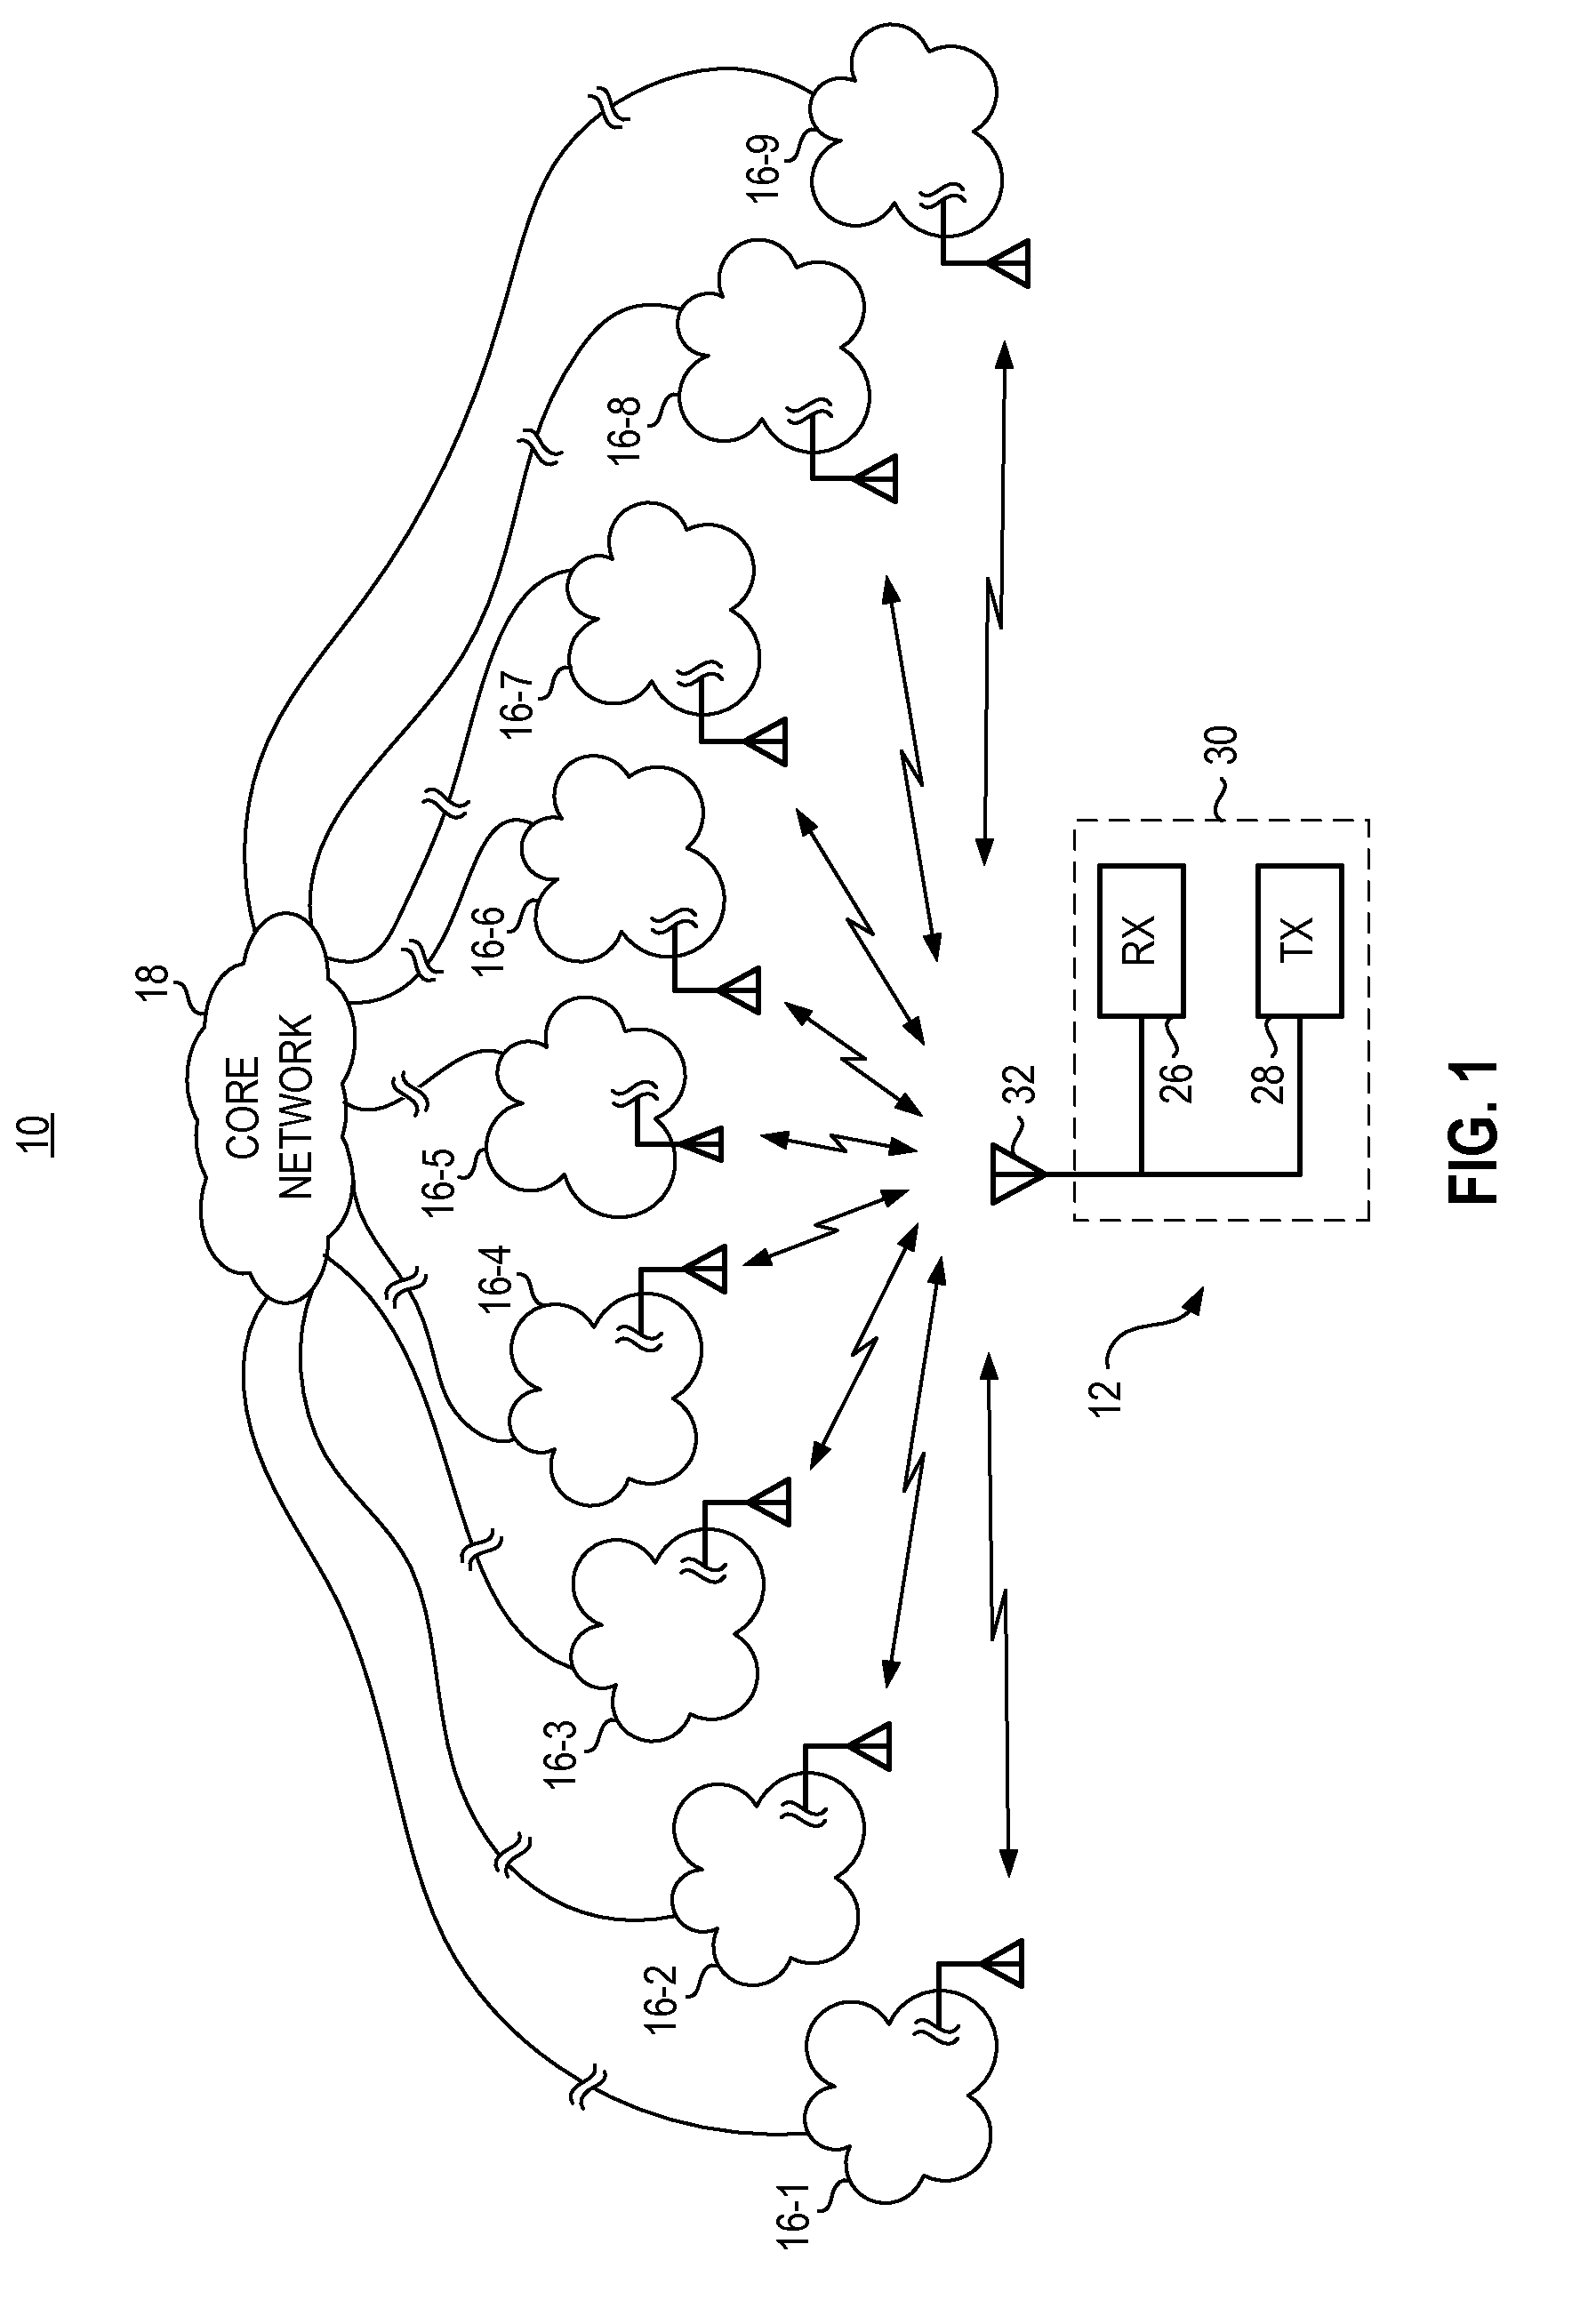 Slot-strip antenna apparatus for a radio device operable over multiple frequency bands